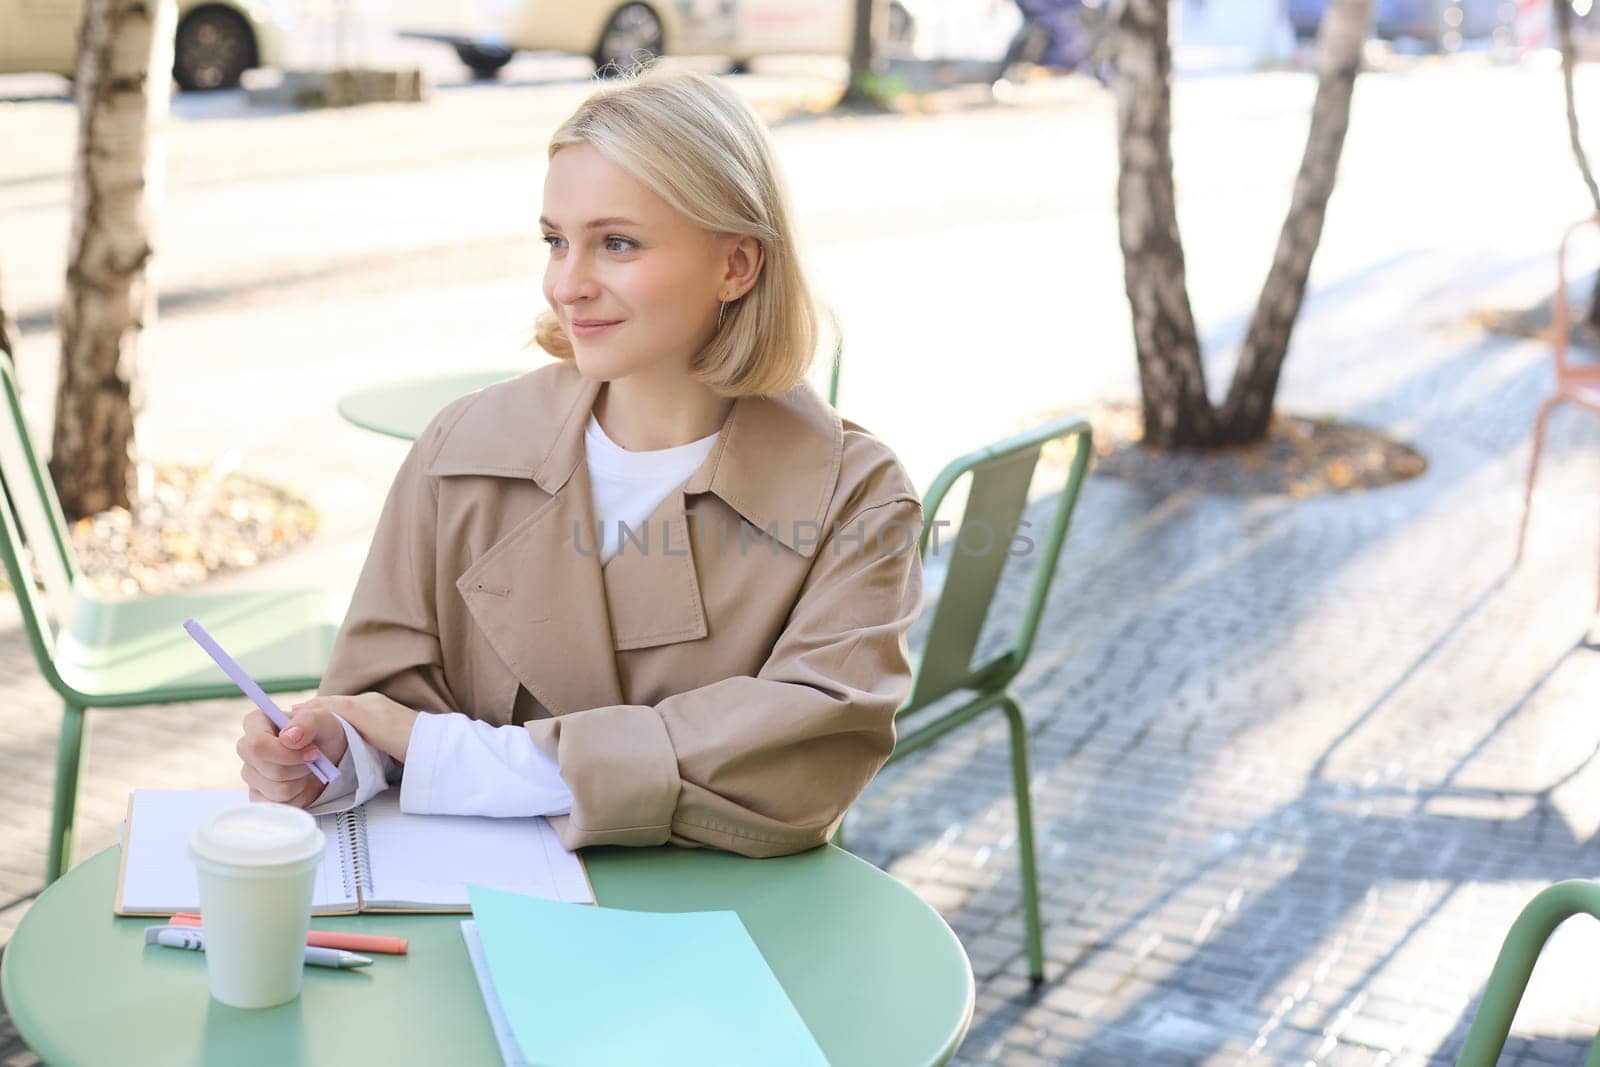 Image of young modern woman, student working on project, sitting in outdoor cafe, drinking coffee and working alone, studying or doing homework.